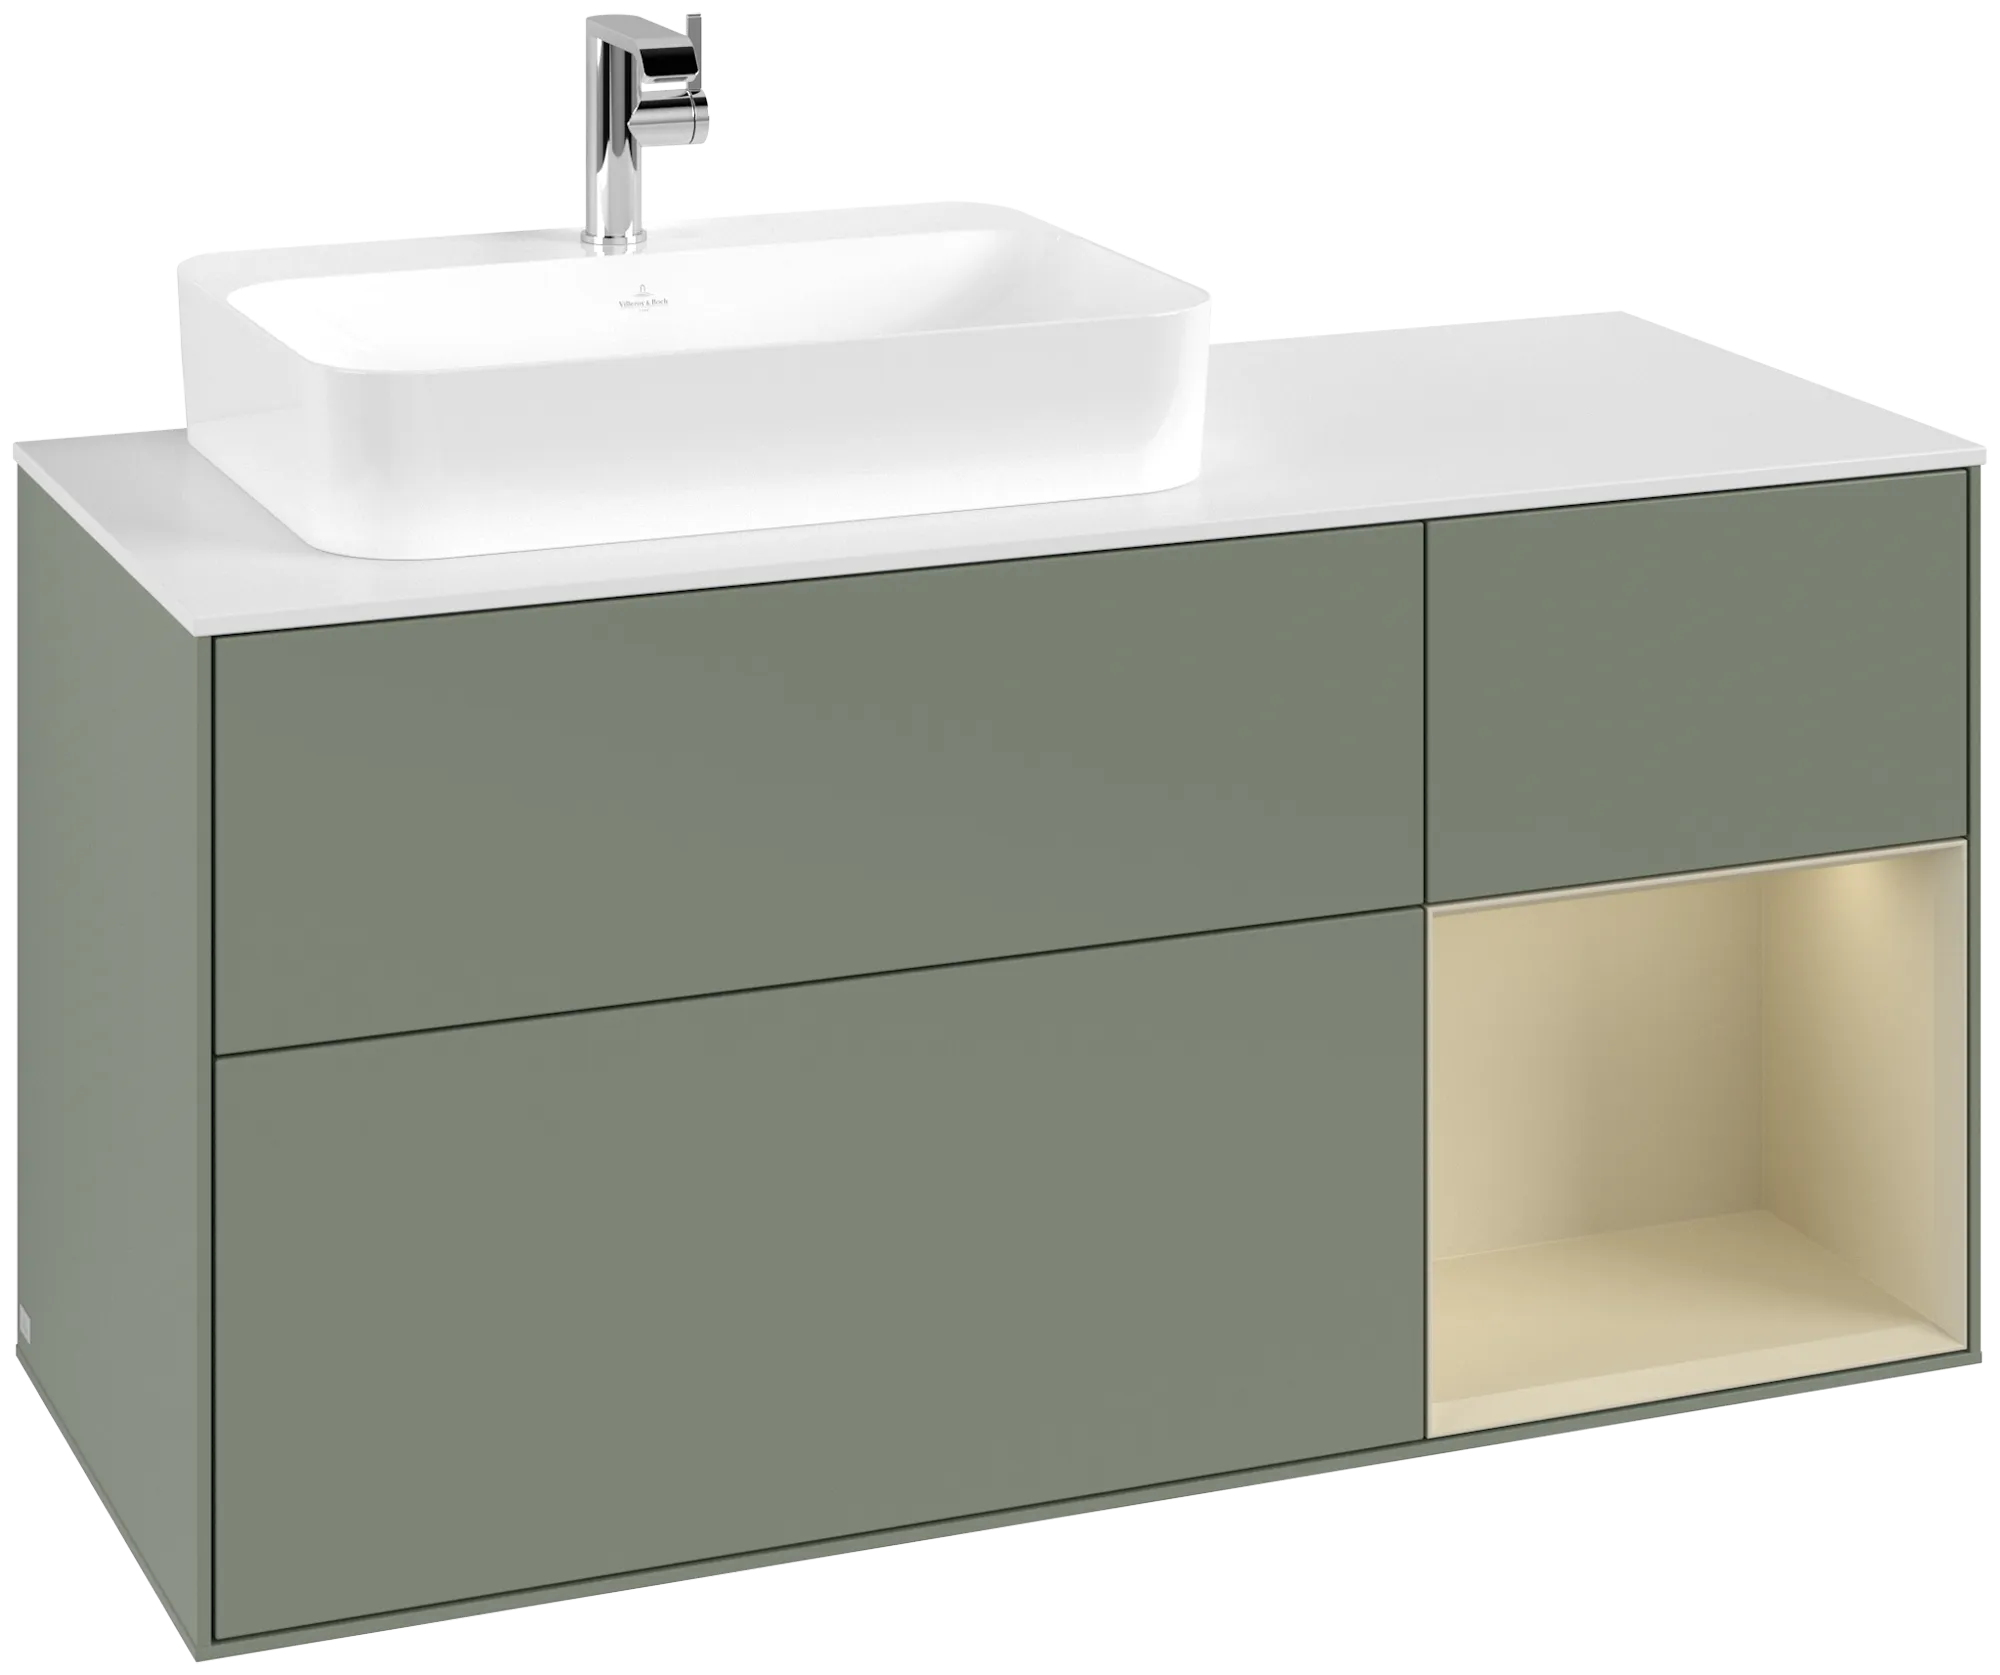 VILLEROY BOCH Finion Vanity unit, with lighting, 3 pull-out compartments, 1200 x 603 x 501 mm, Olive Matt Lacquer / Silk Grey Matt Lacquer / Glass White Matt #G401HJGM resmi